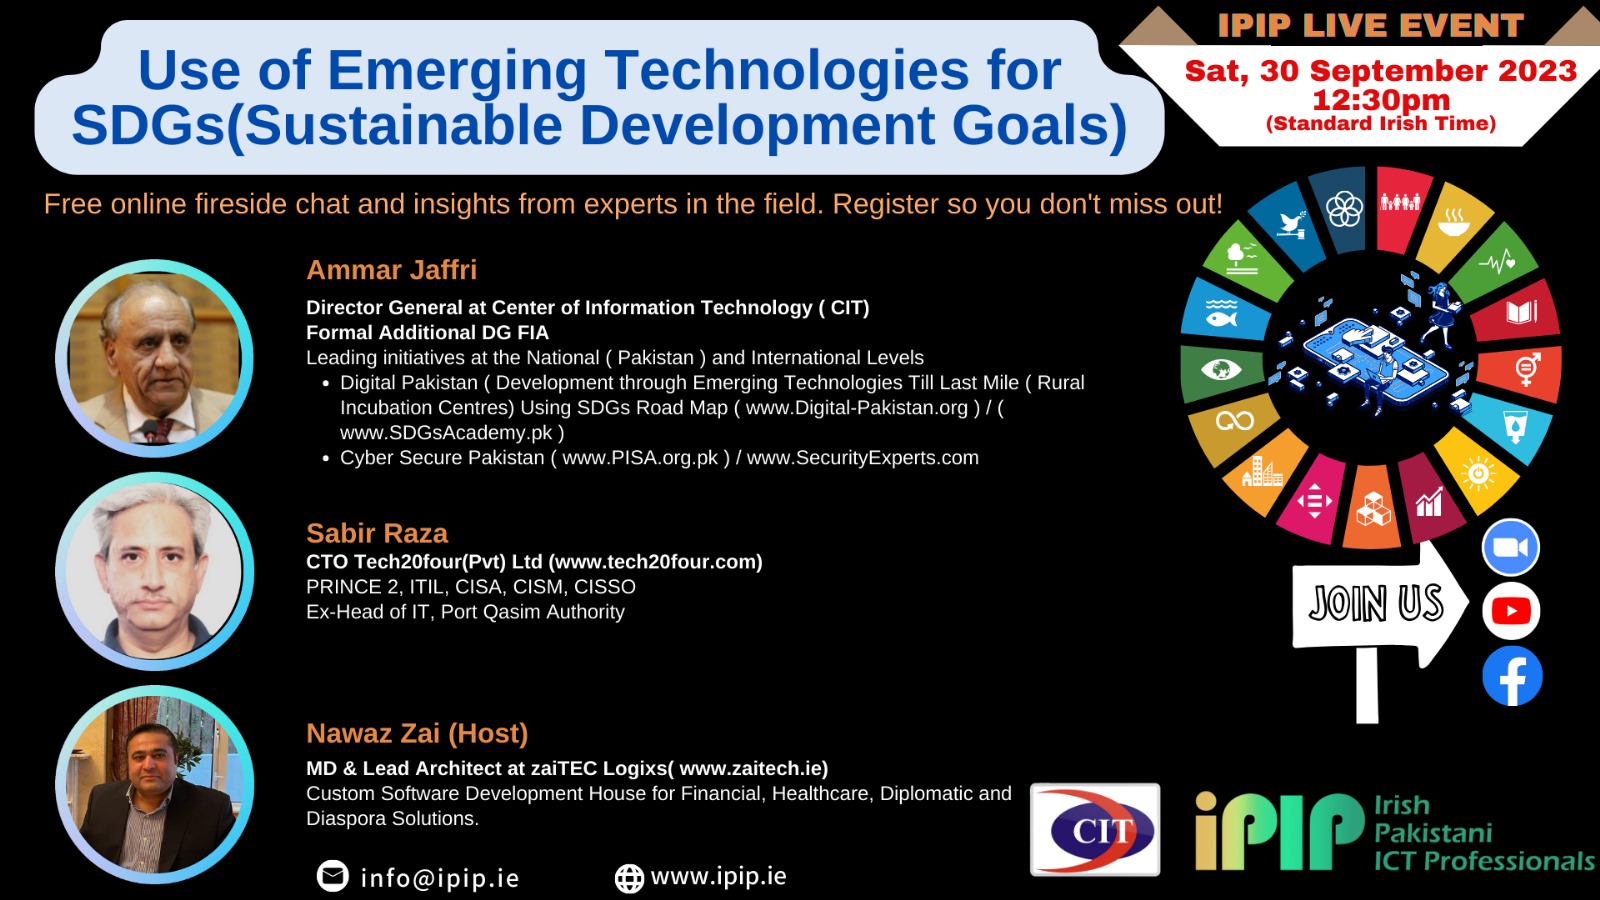 "Use of Emerging Technologies for SDGs (Sustainable Development Goals)" by iPIP & CIT Pakistan